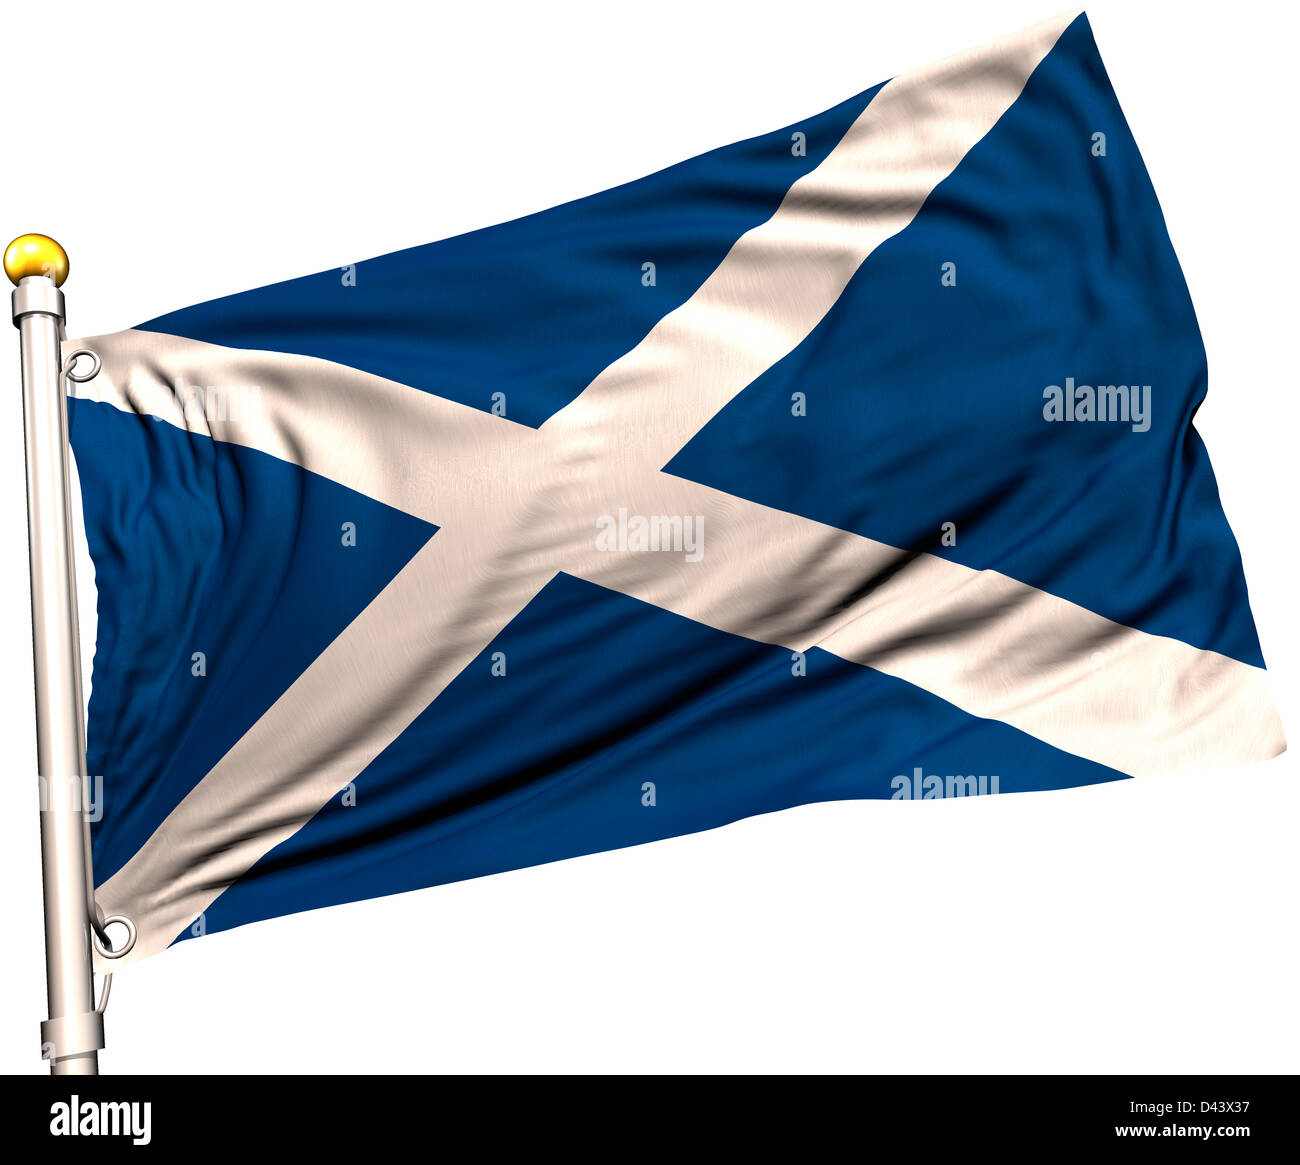 Scotland flag on a flag pole. Clipping path included. Silk texture visible on the flag at 100%. Stock Photo